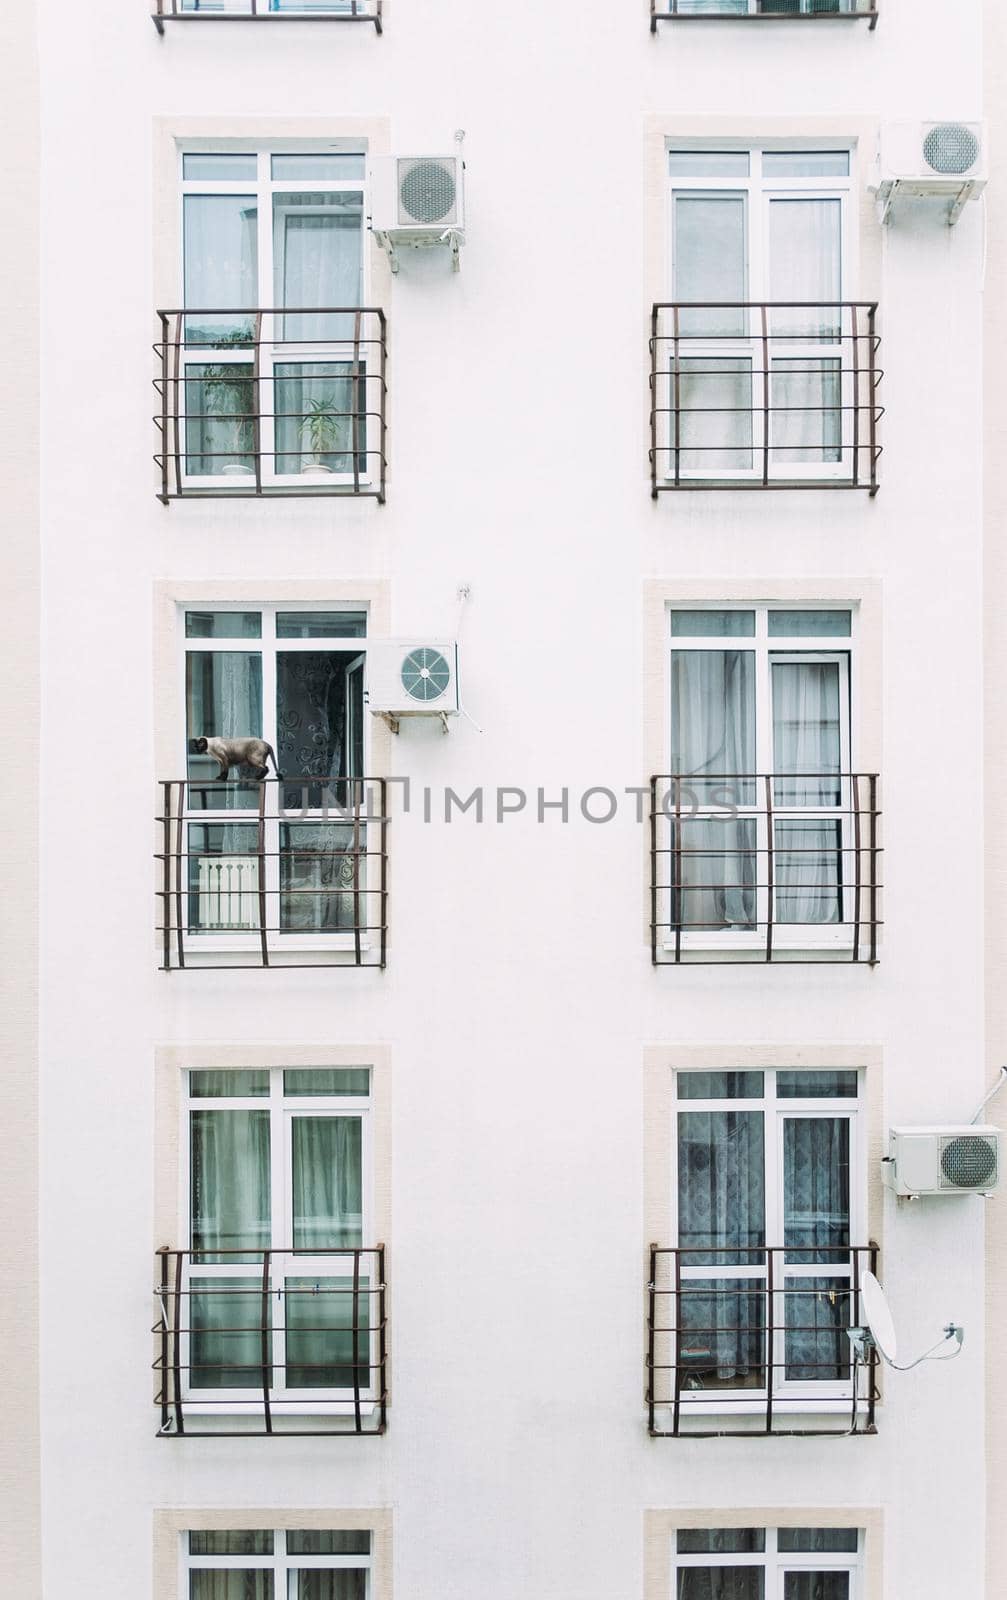 Siamese cat walking on edge of balcony of an apartment building outdoor.